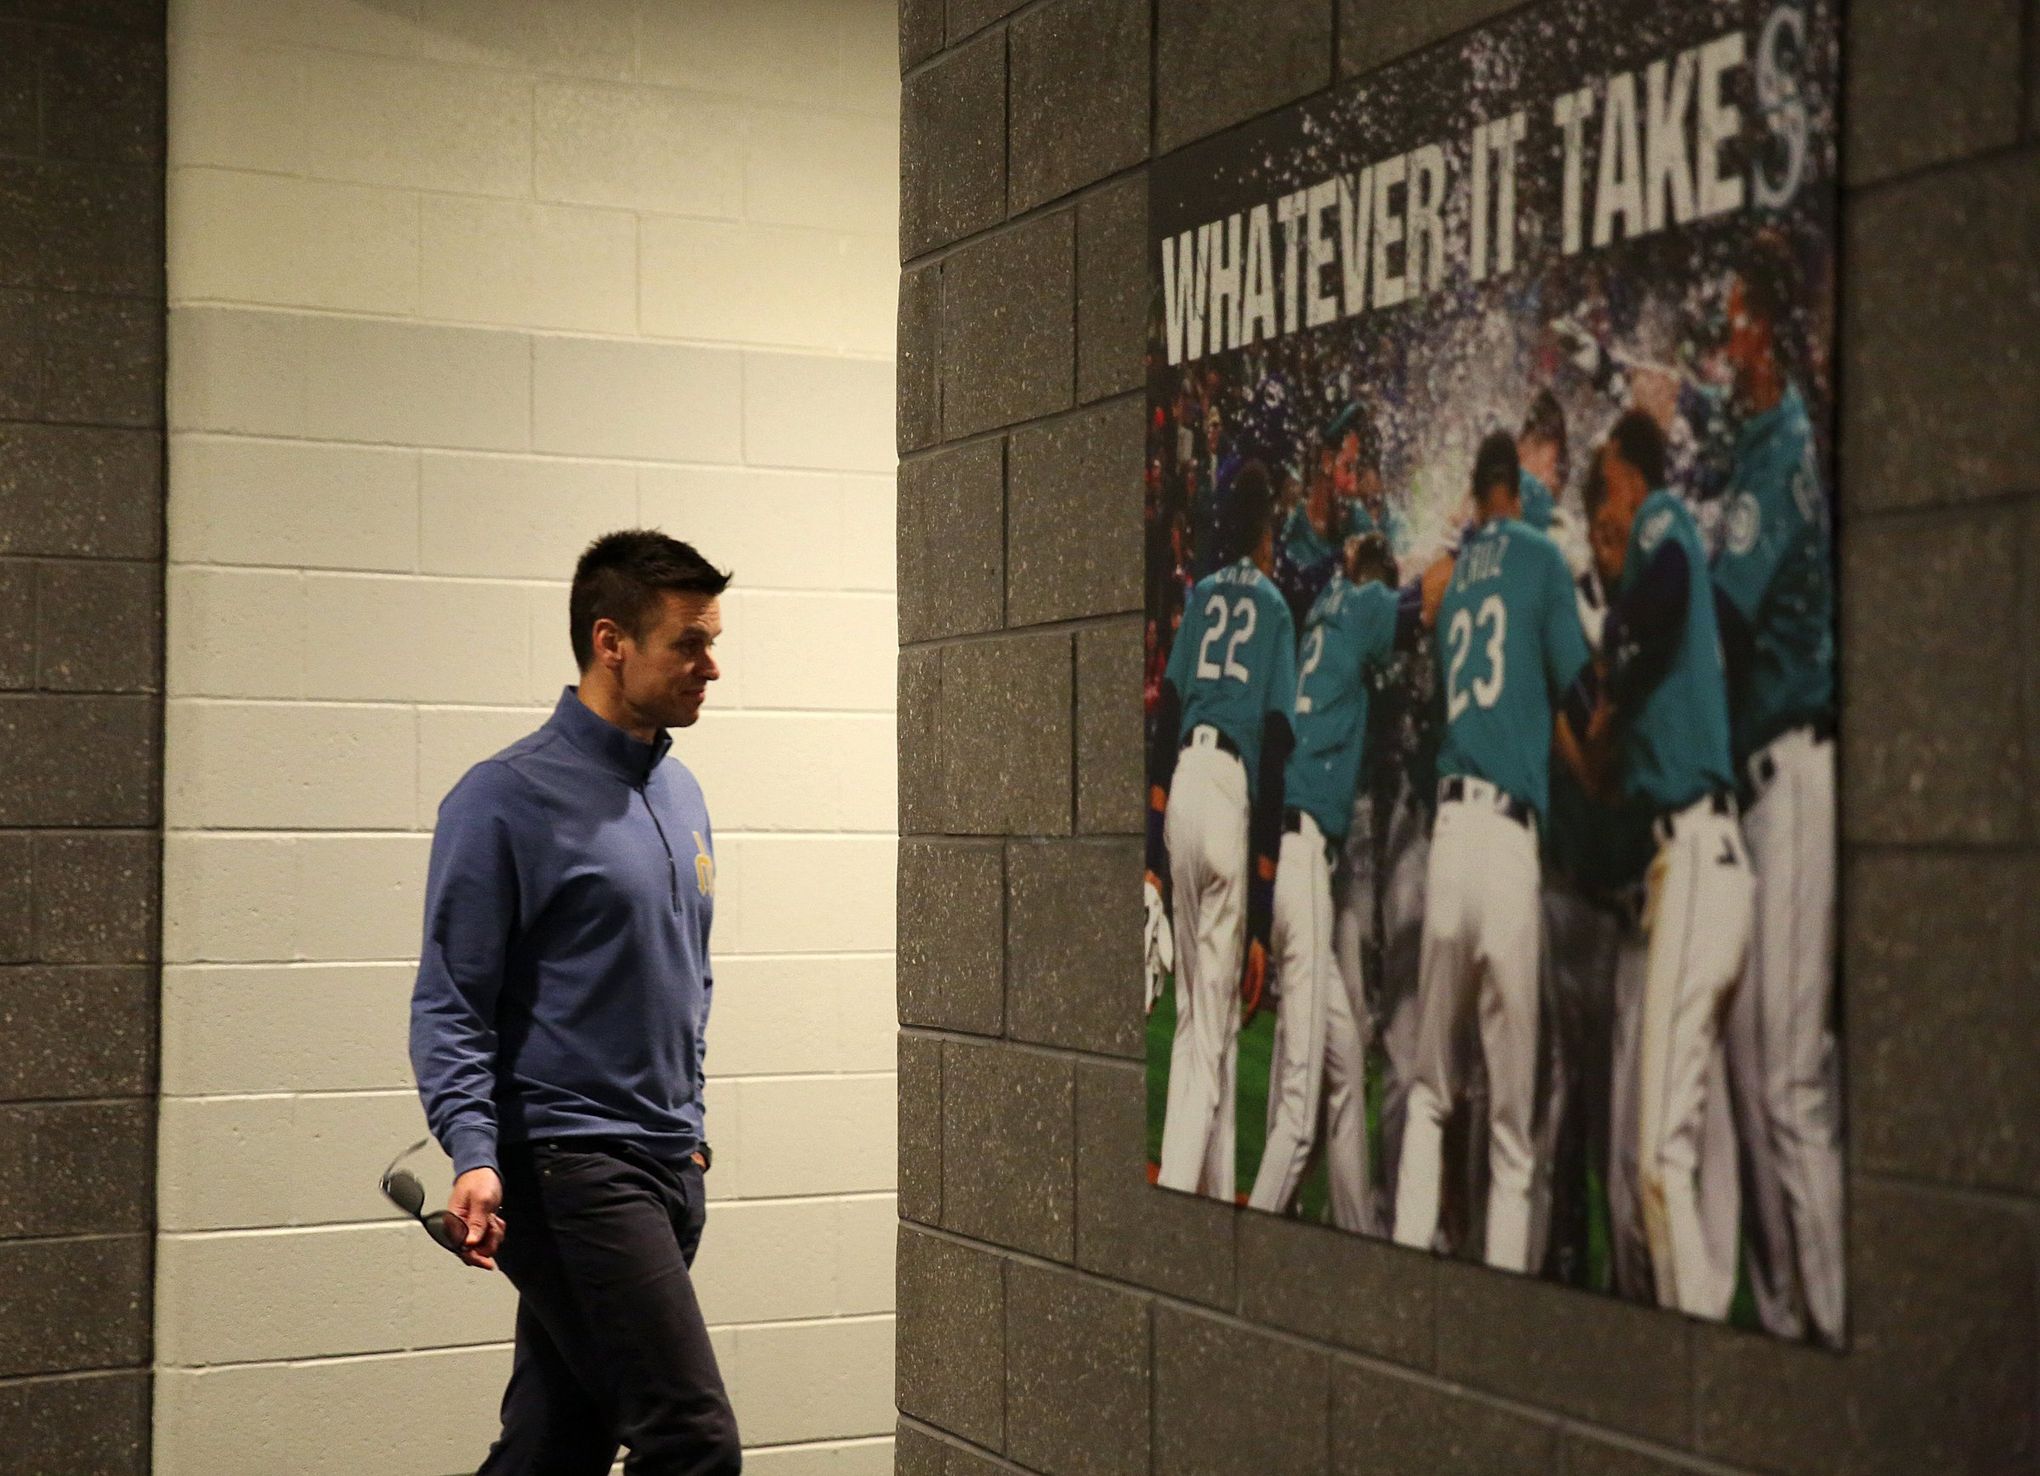 After losing out on Shohei Ohtani, Mariners GM Jerry Dipoto